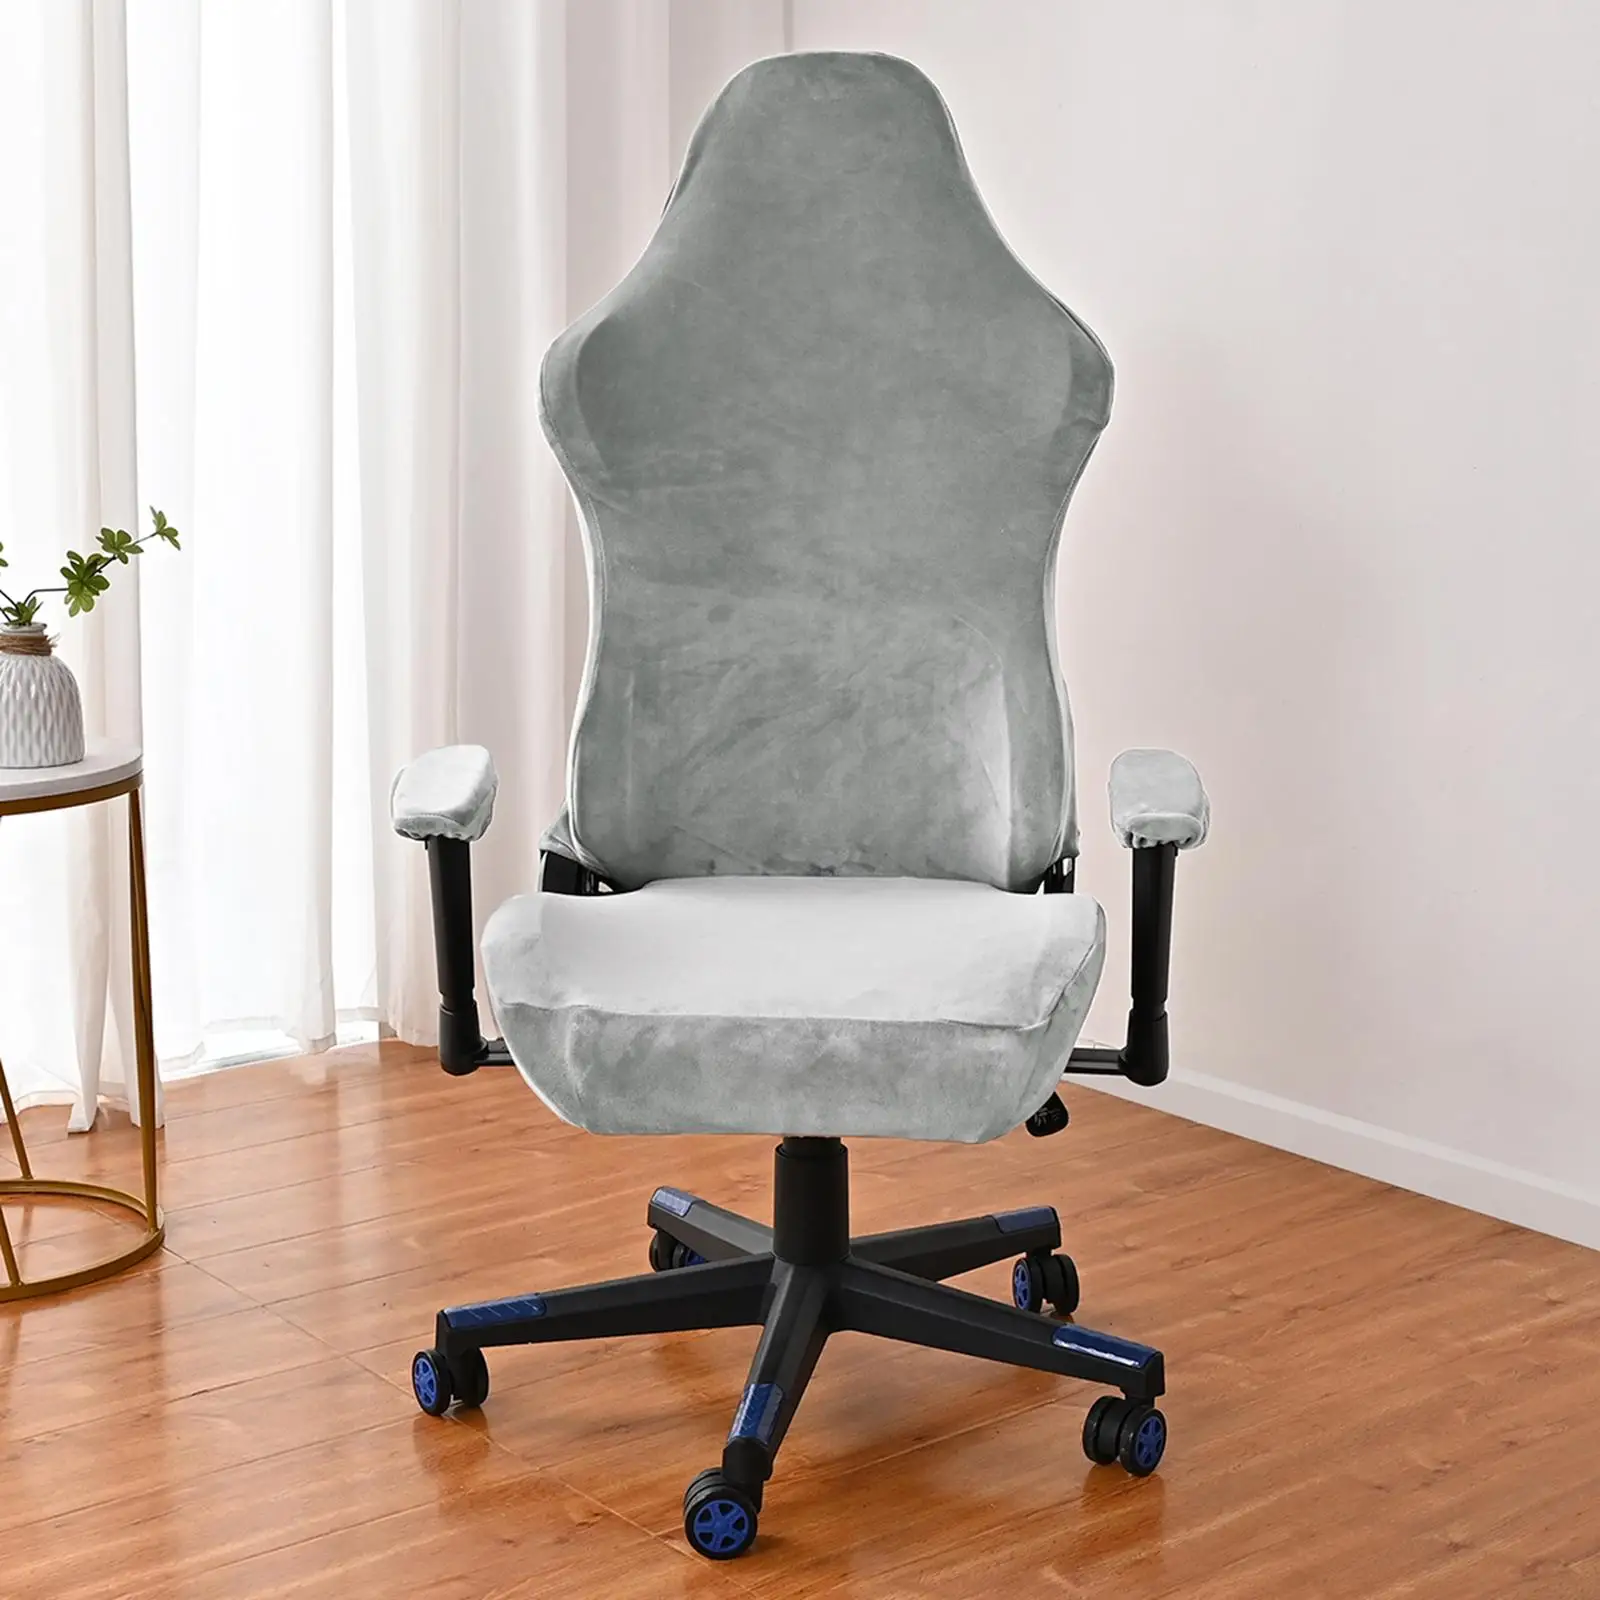 Office Chair Slipcover with Arm Rest Covers Stretchable Washable Seat and Back